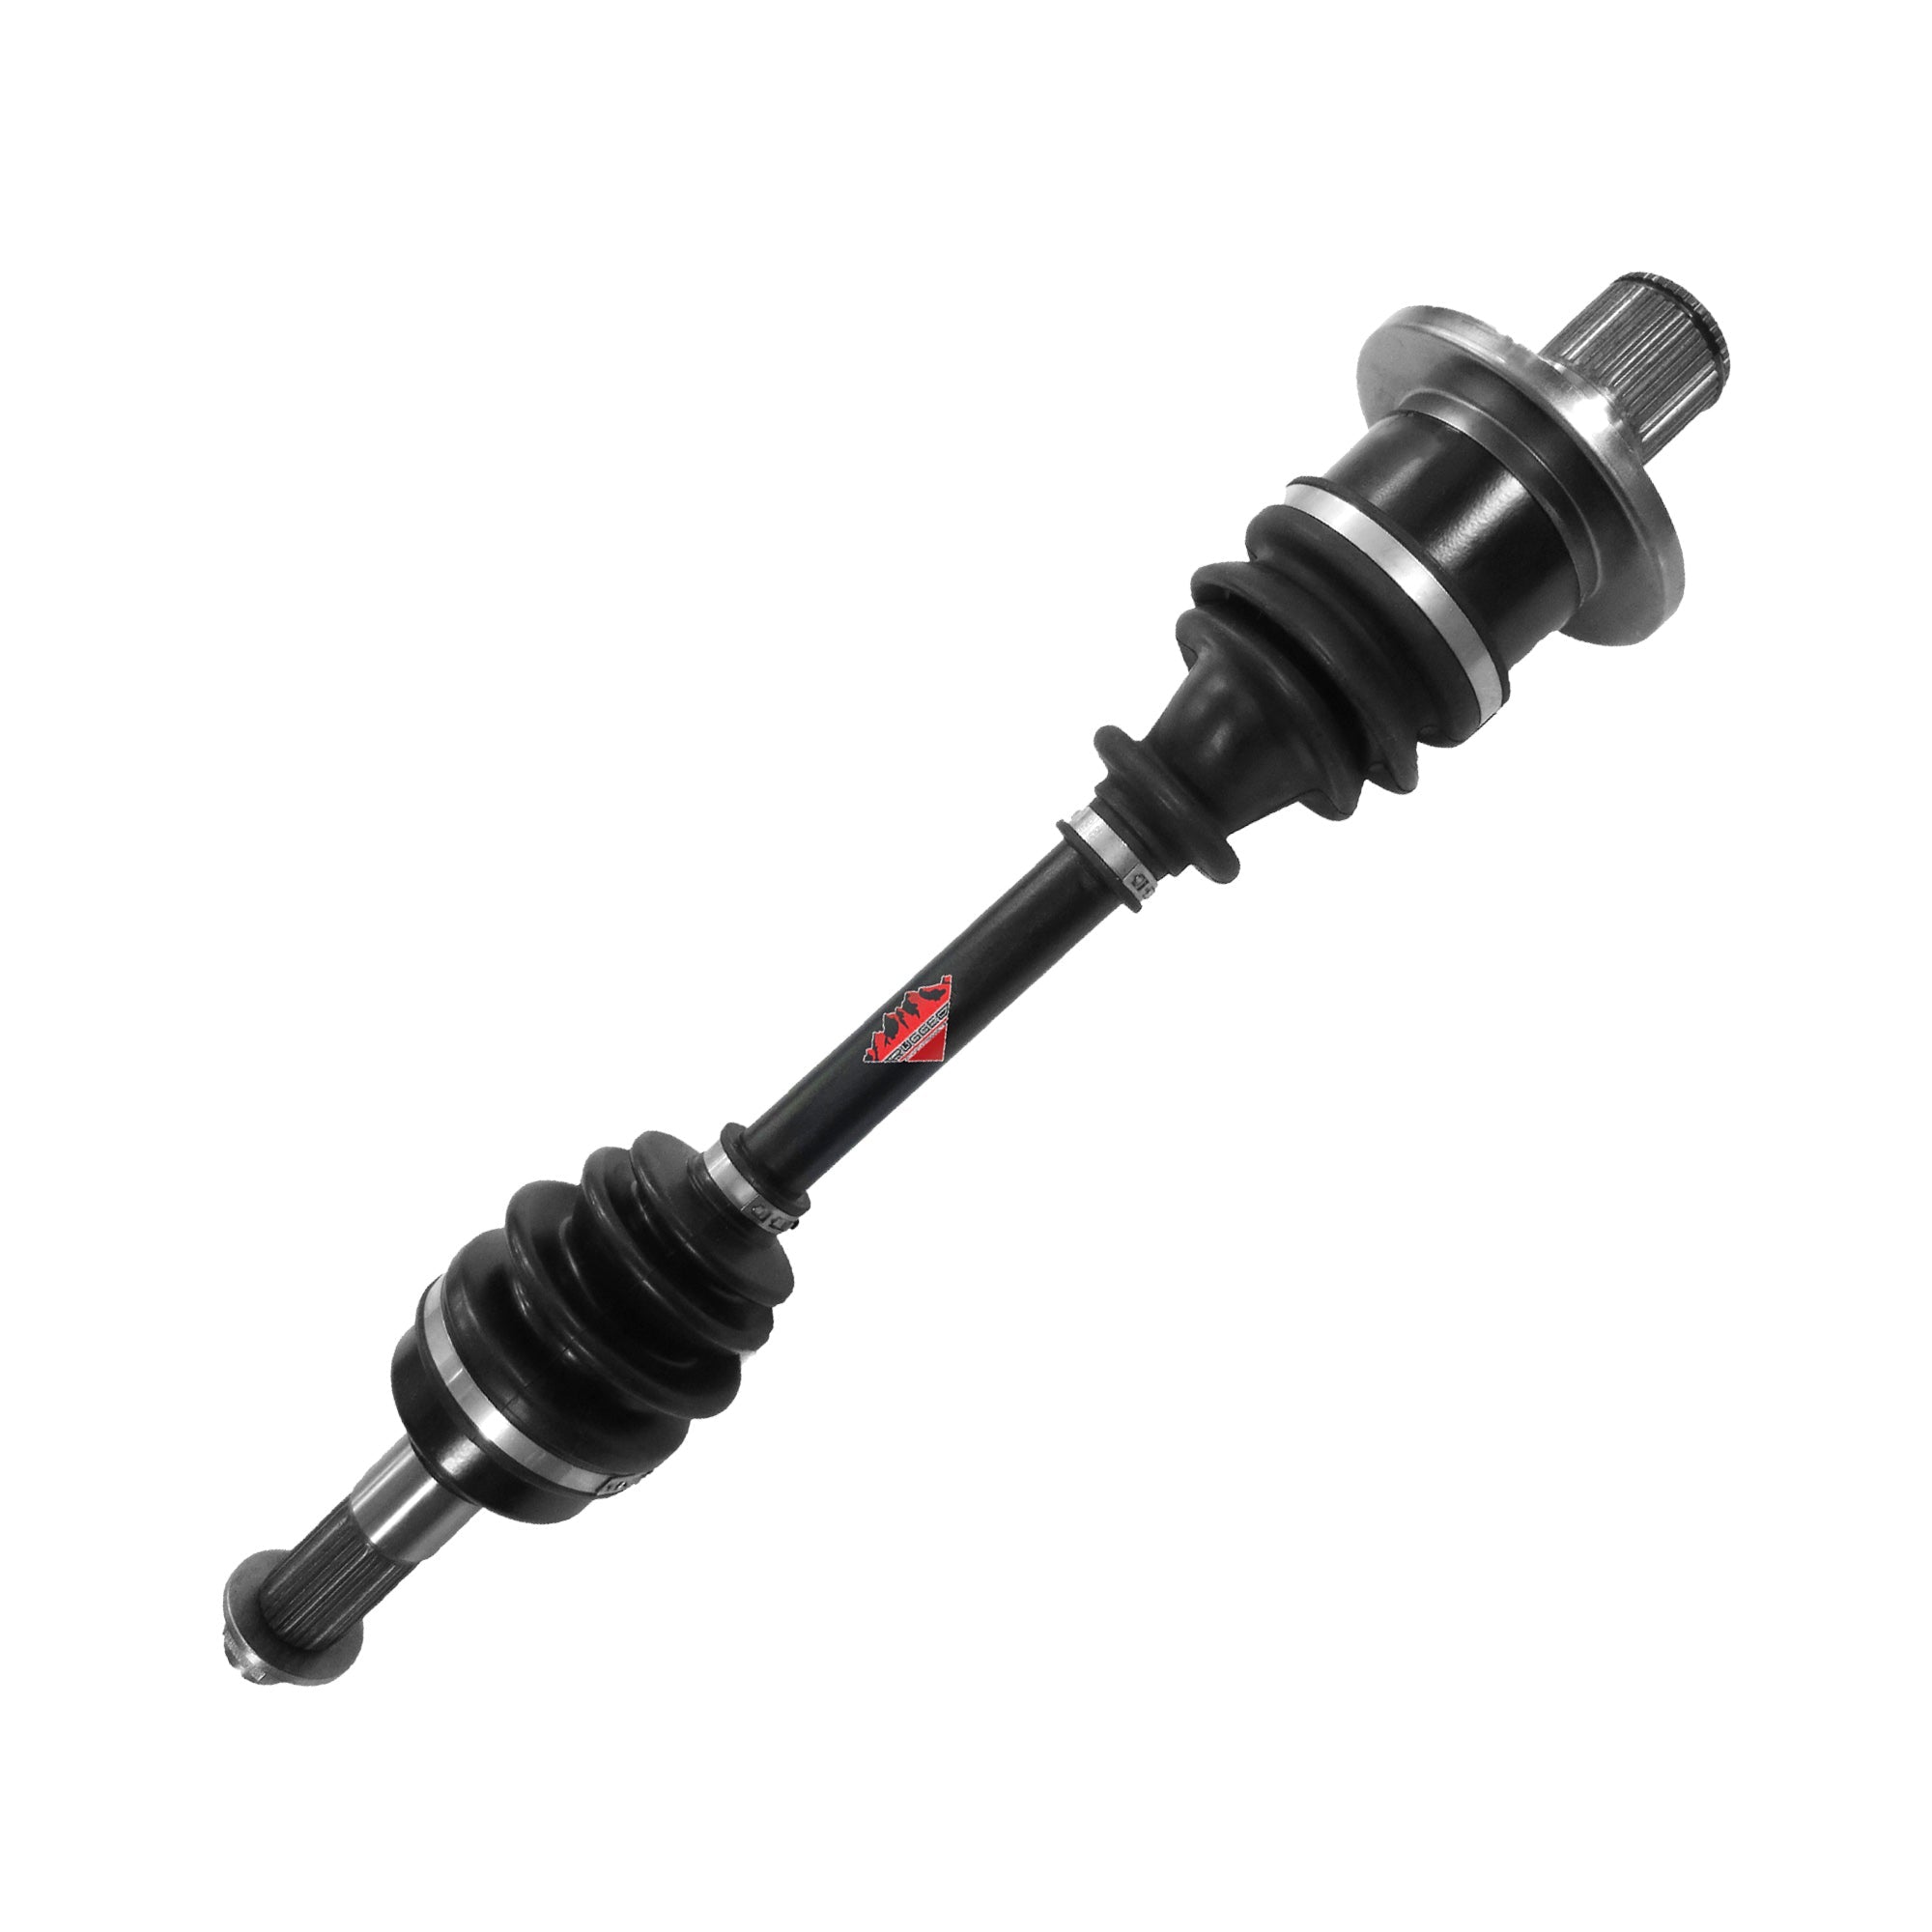 Performance Axle for Arctic Cat TRV 500 